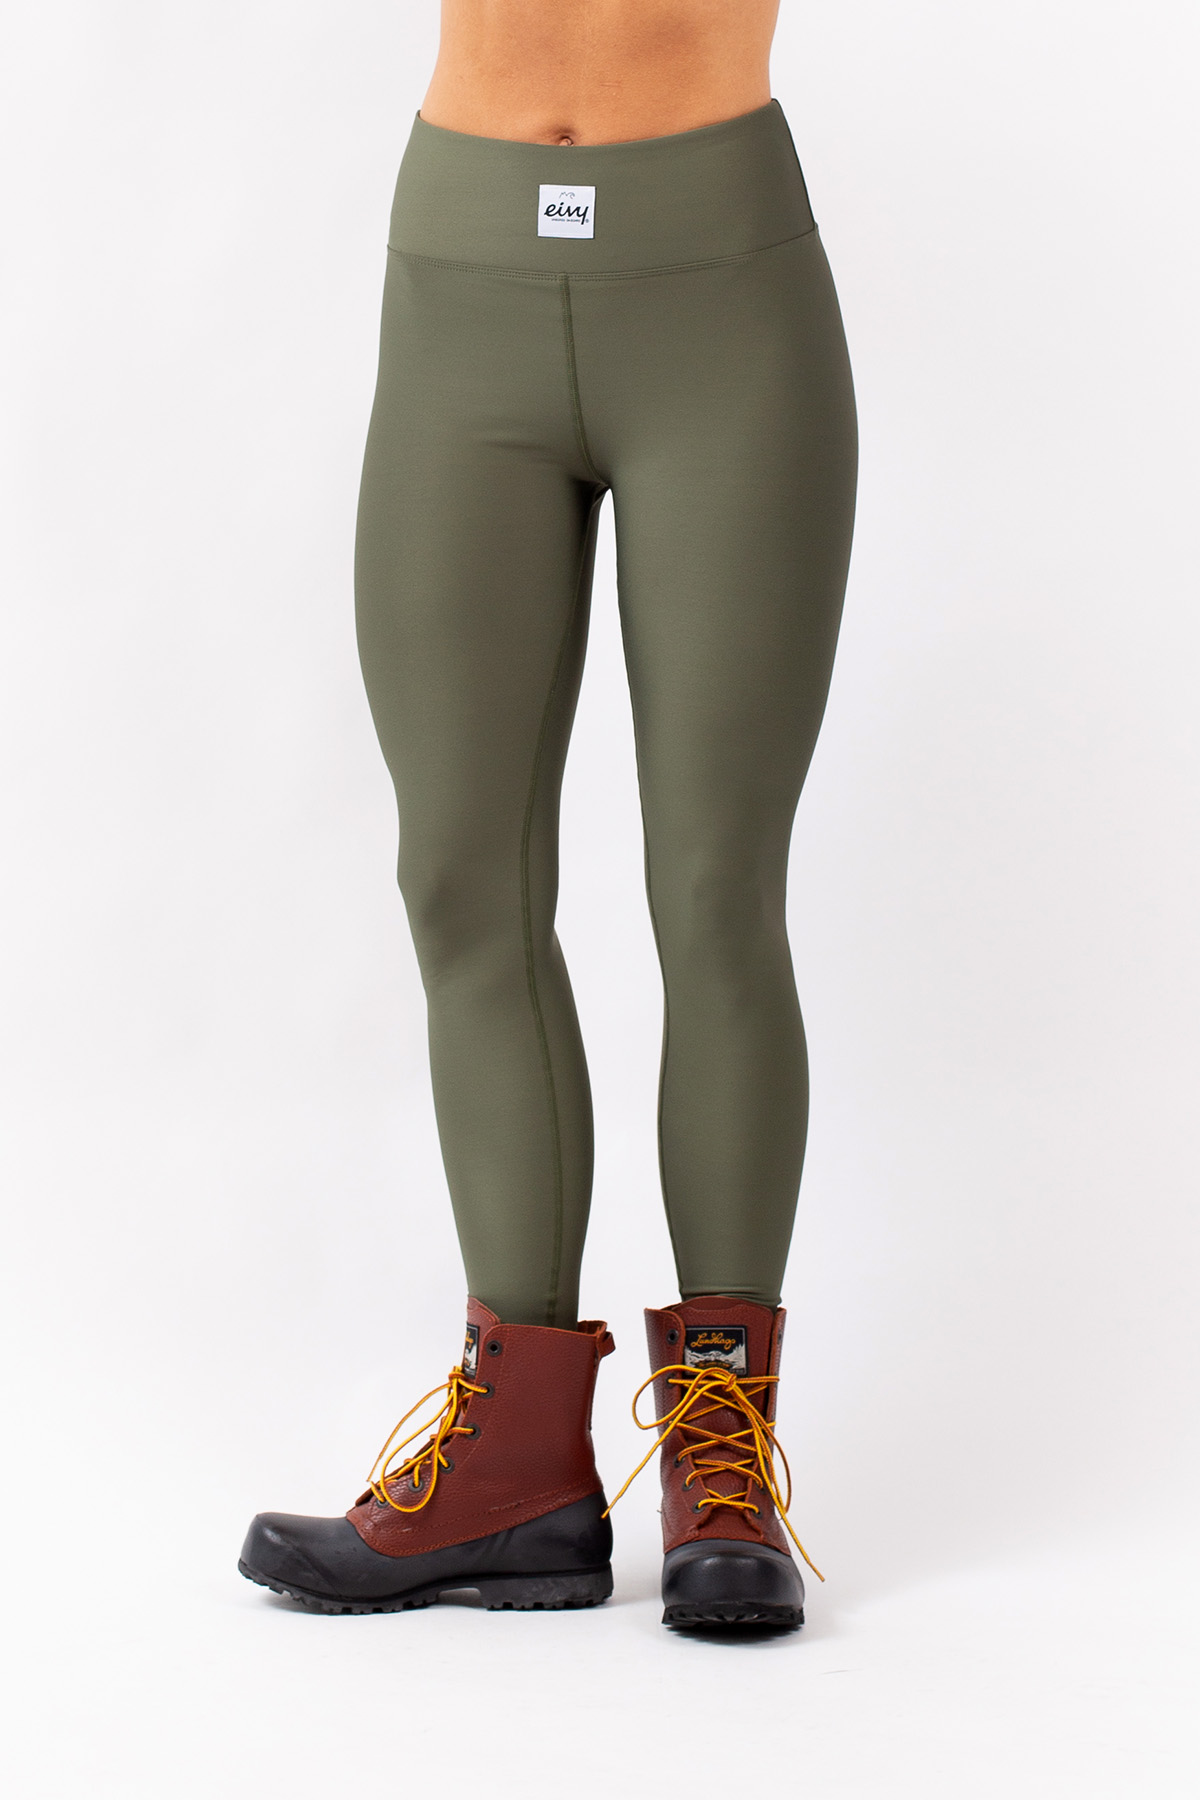 https://www.eivy.co/image/5269/Base-Layer-Icecold-Tights---Forest-Green-Front-2.jpg